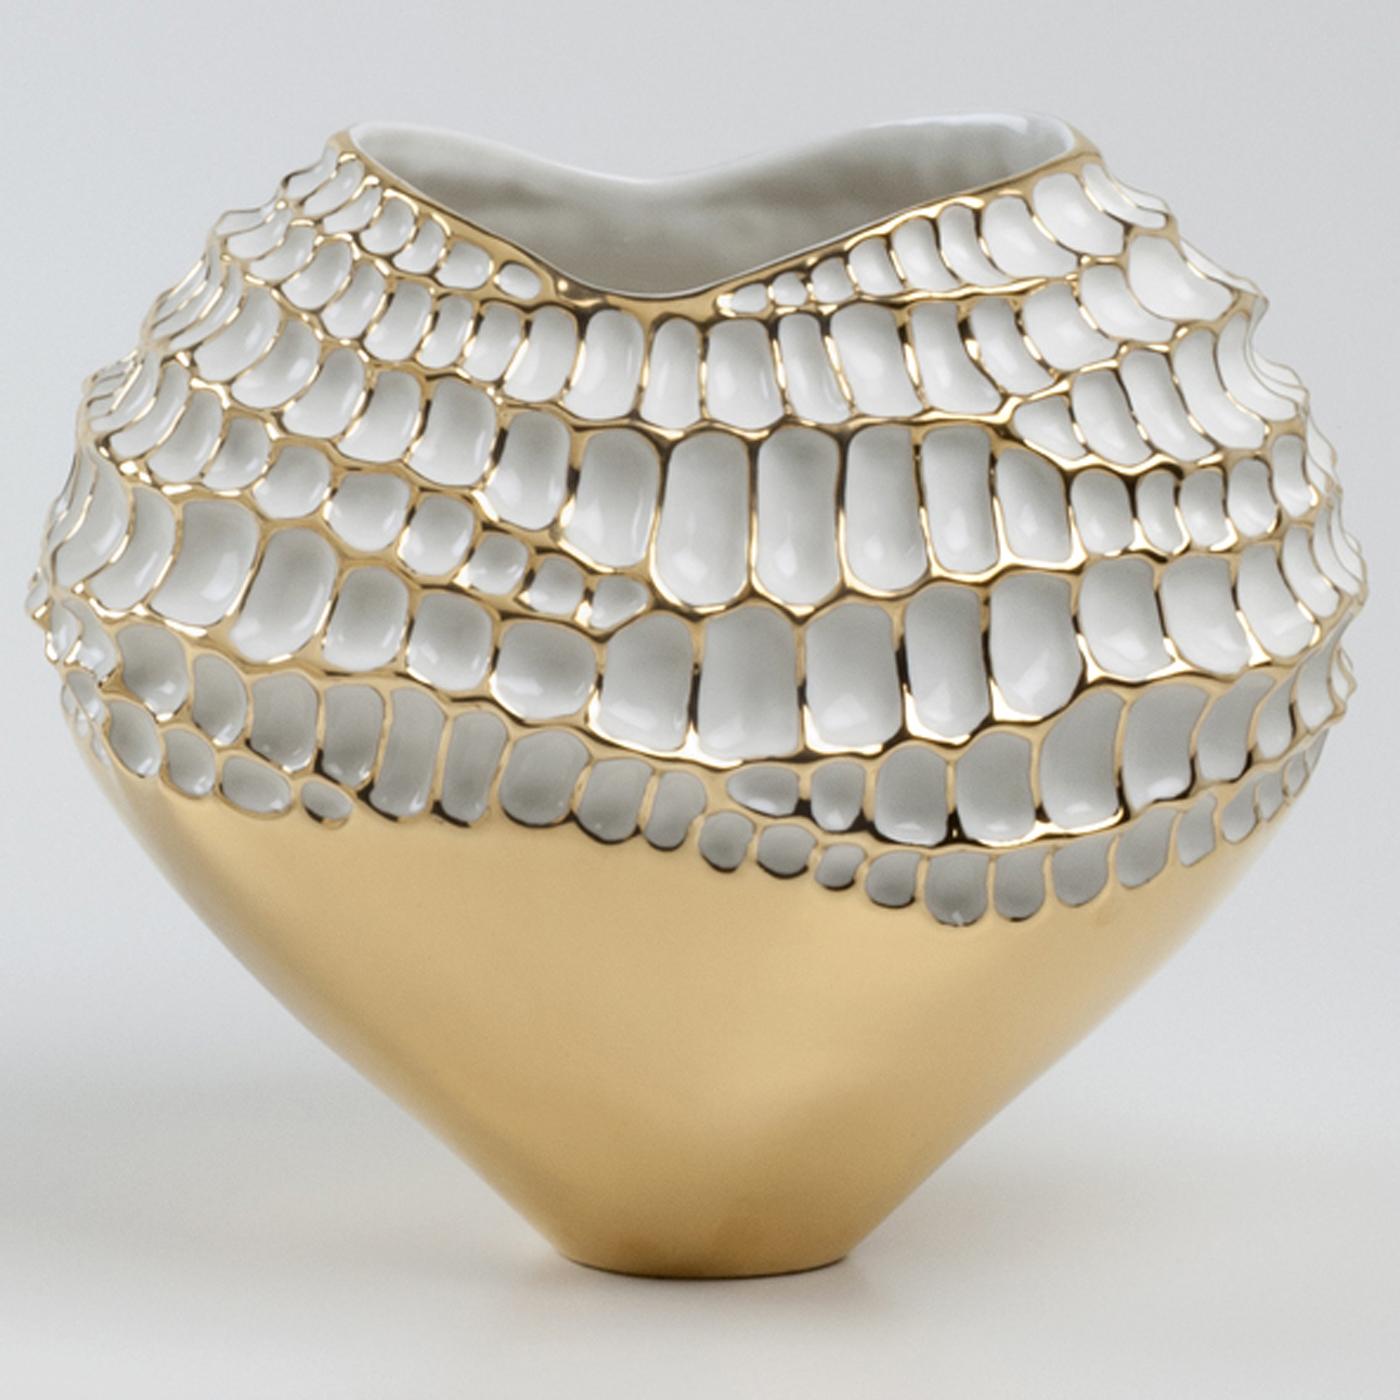 Modern Gold and White Sporos Vase by Fos Ceramiche